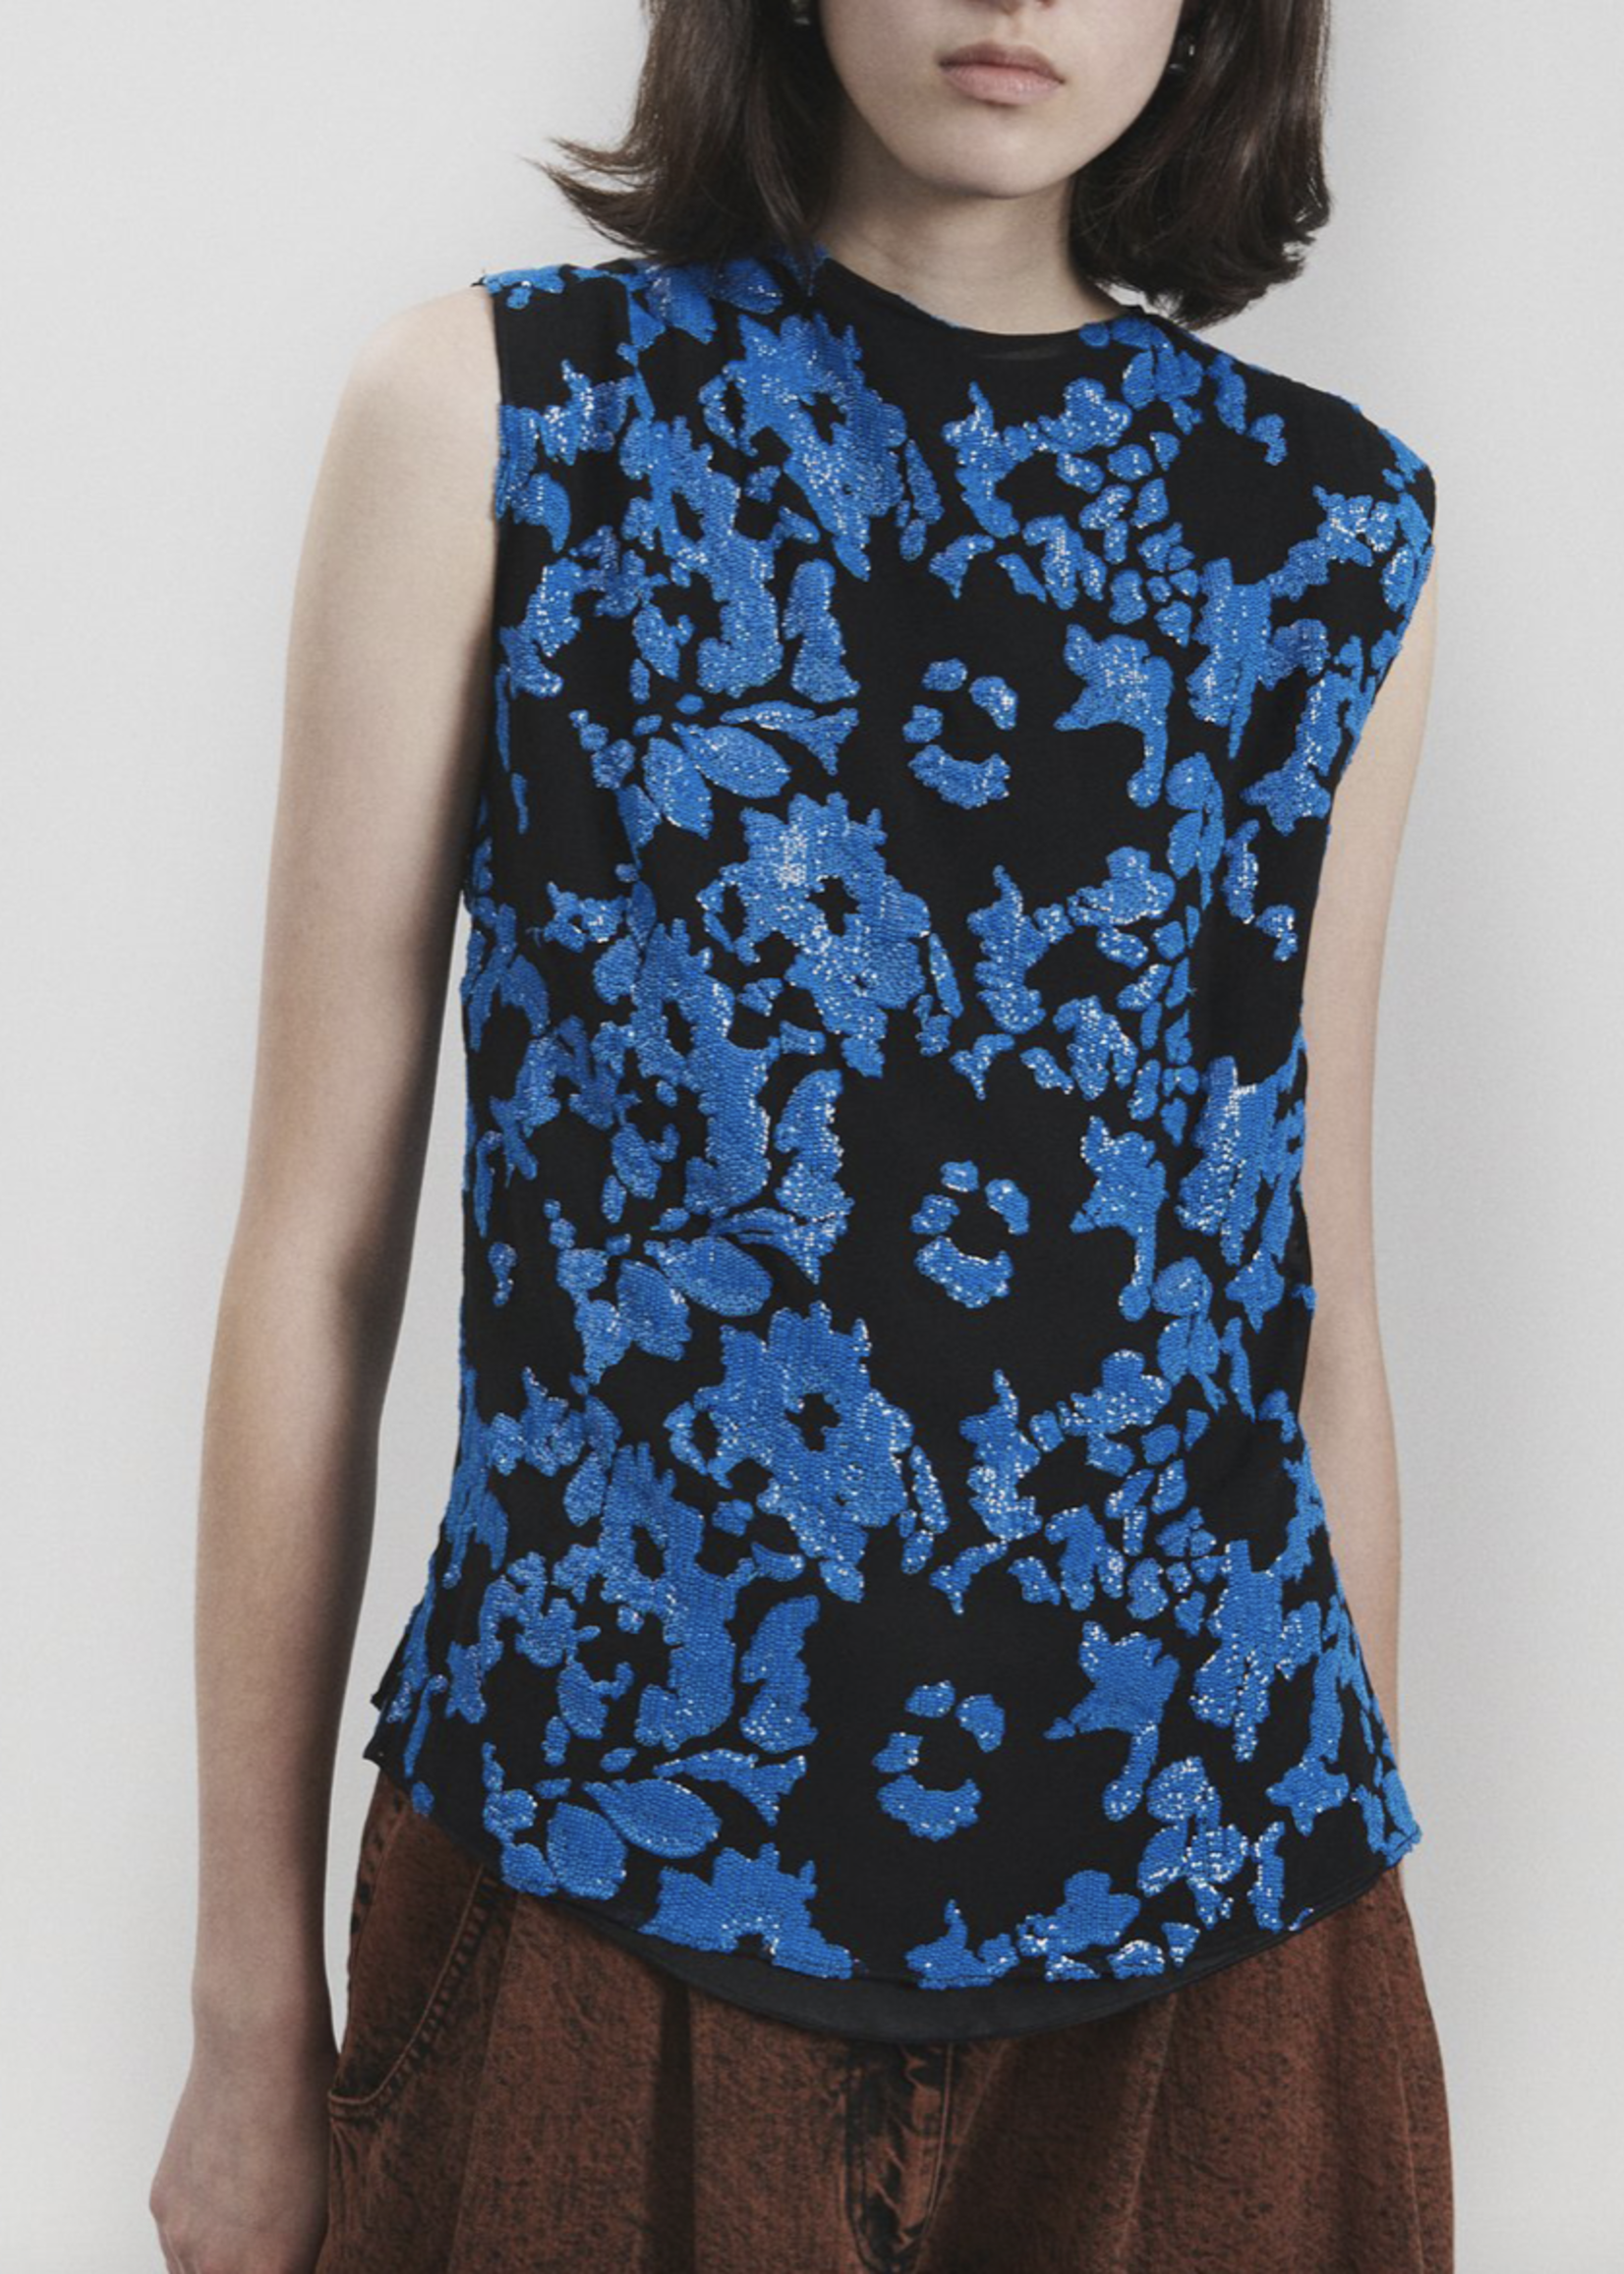 Rachel Comey Kaoma Sequin Top in Blue and Black